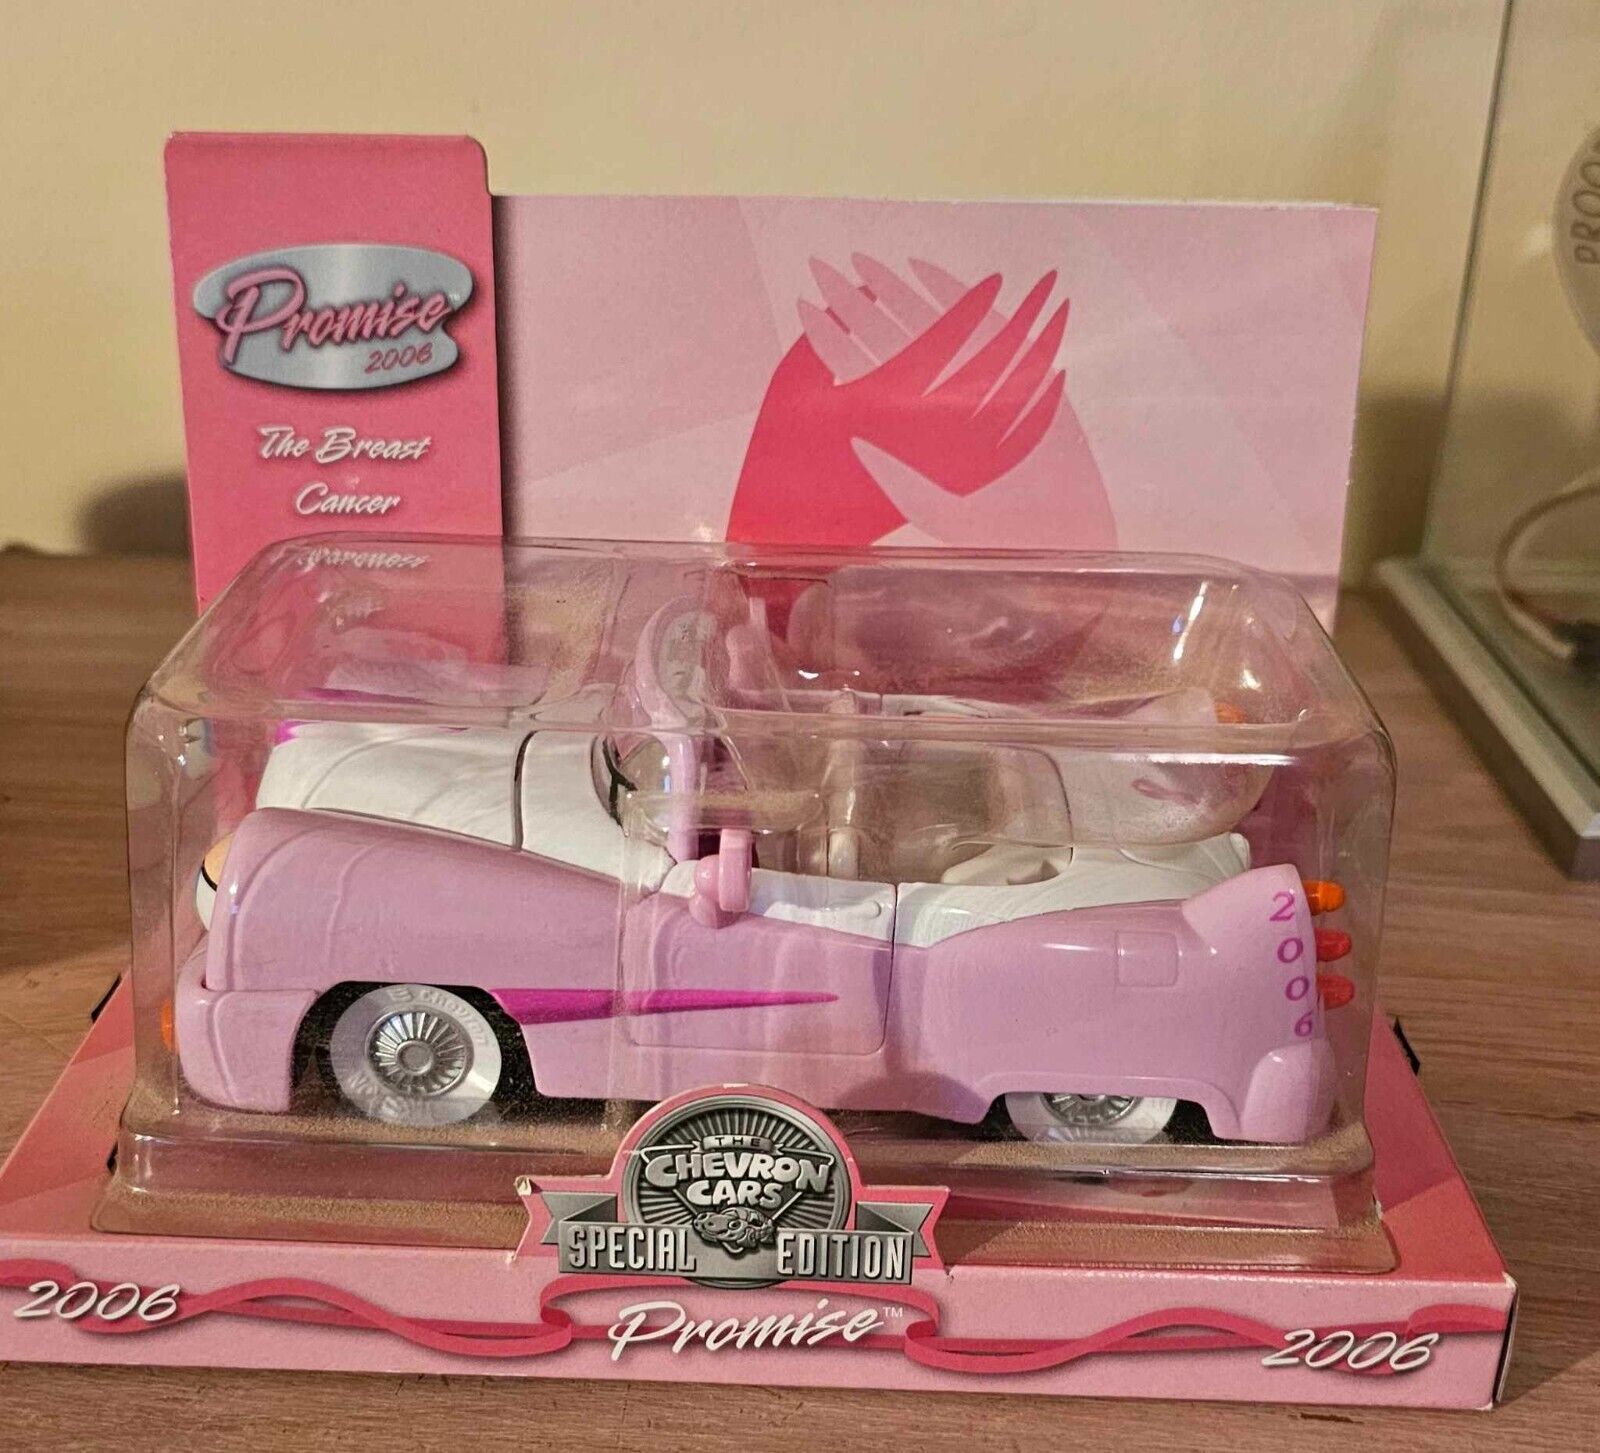 Chevron Car Promise 2006 SPECIAL EDITION Cancer Awareness Pink Ribbon 2006